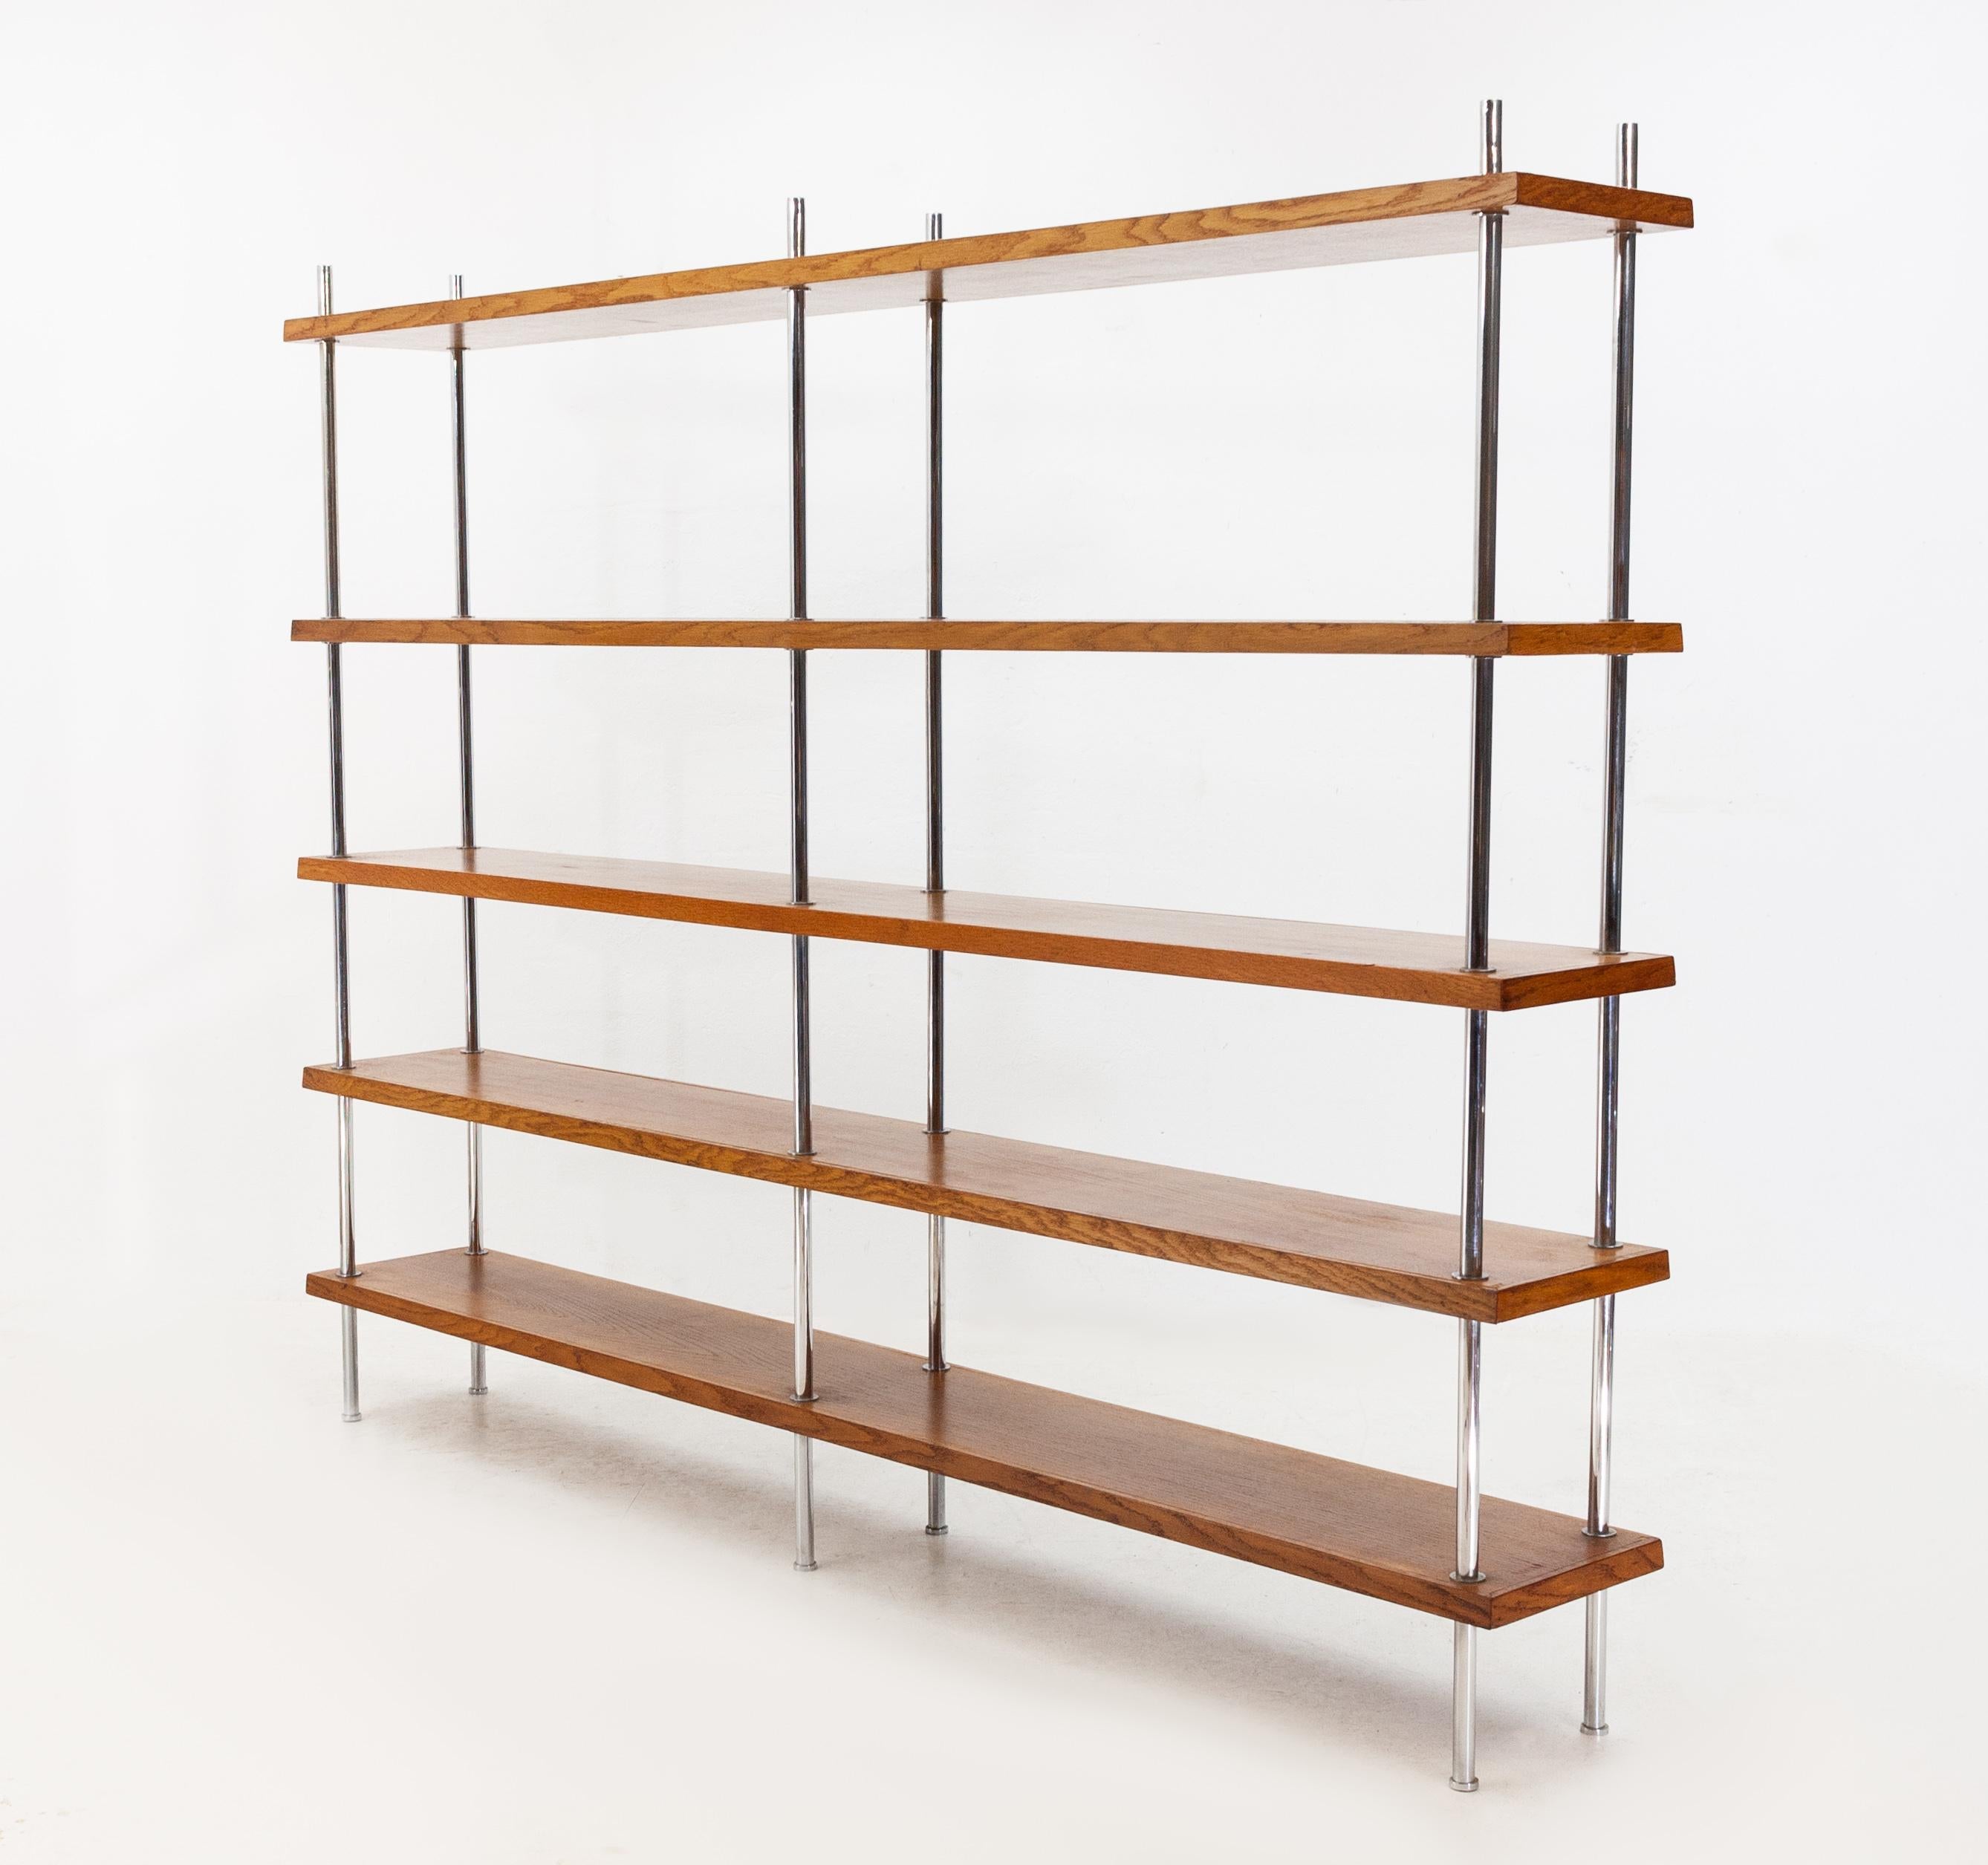 Freestanding oak bookcase or room divider. Five shelves connecting by heavy chrome-plated steel tube frame,
1930-1940.The shelves are handmade. Bauhaus Marcel Breuer Mart Stam top quality made. Very robust item. Demountable good condition.